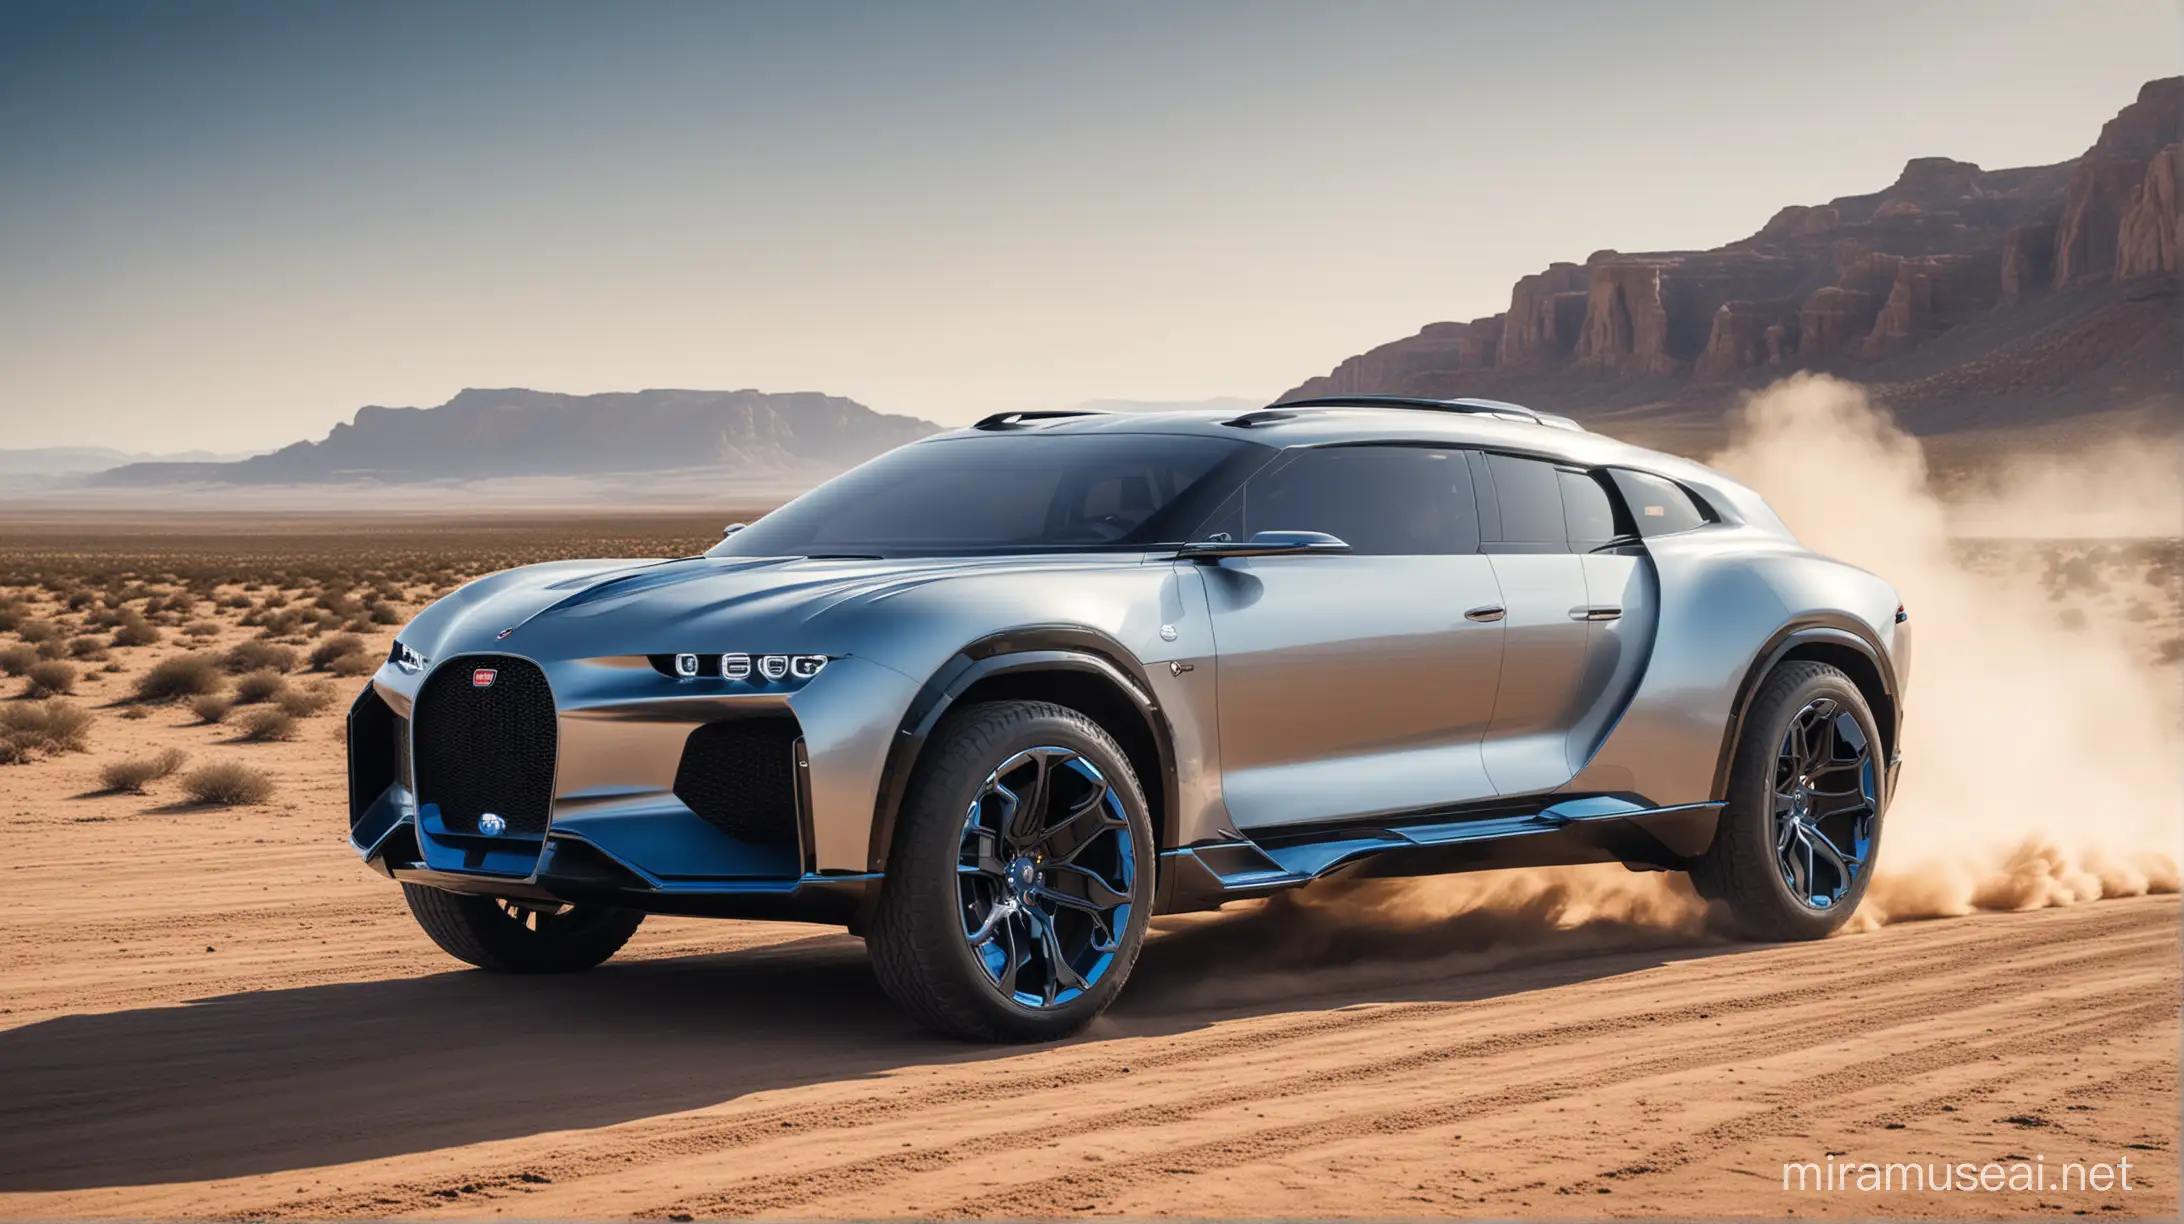 A silver and blue concept suv car made by bugatti,  it is full size suv car in style of bugatti la voiture noire,  driving on the desert 